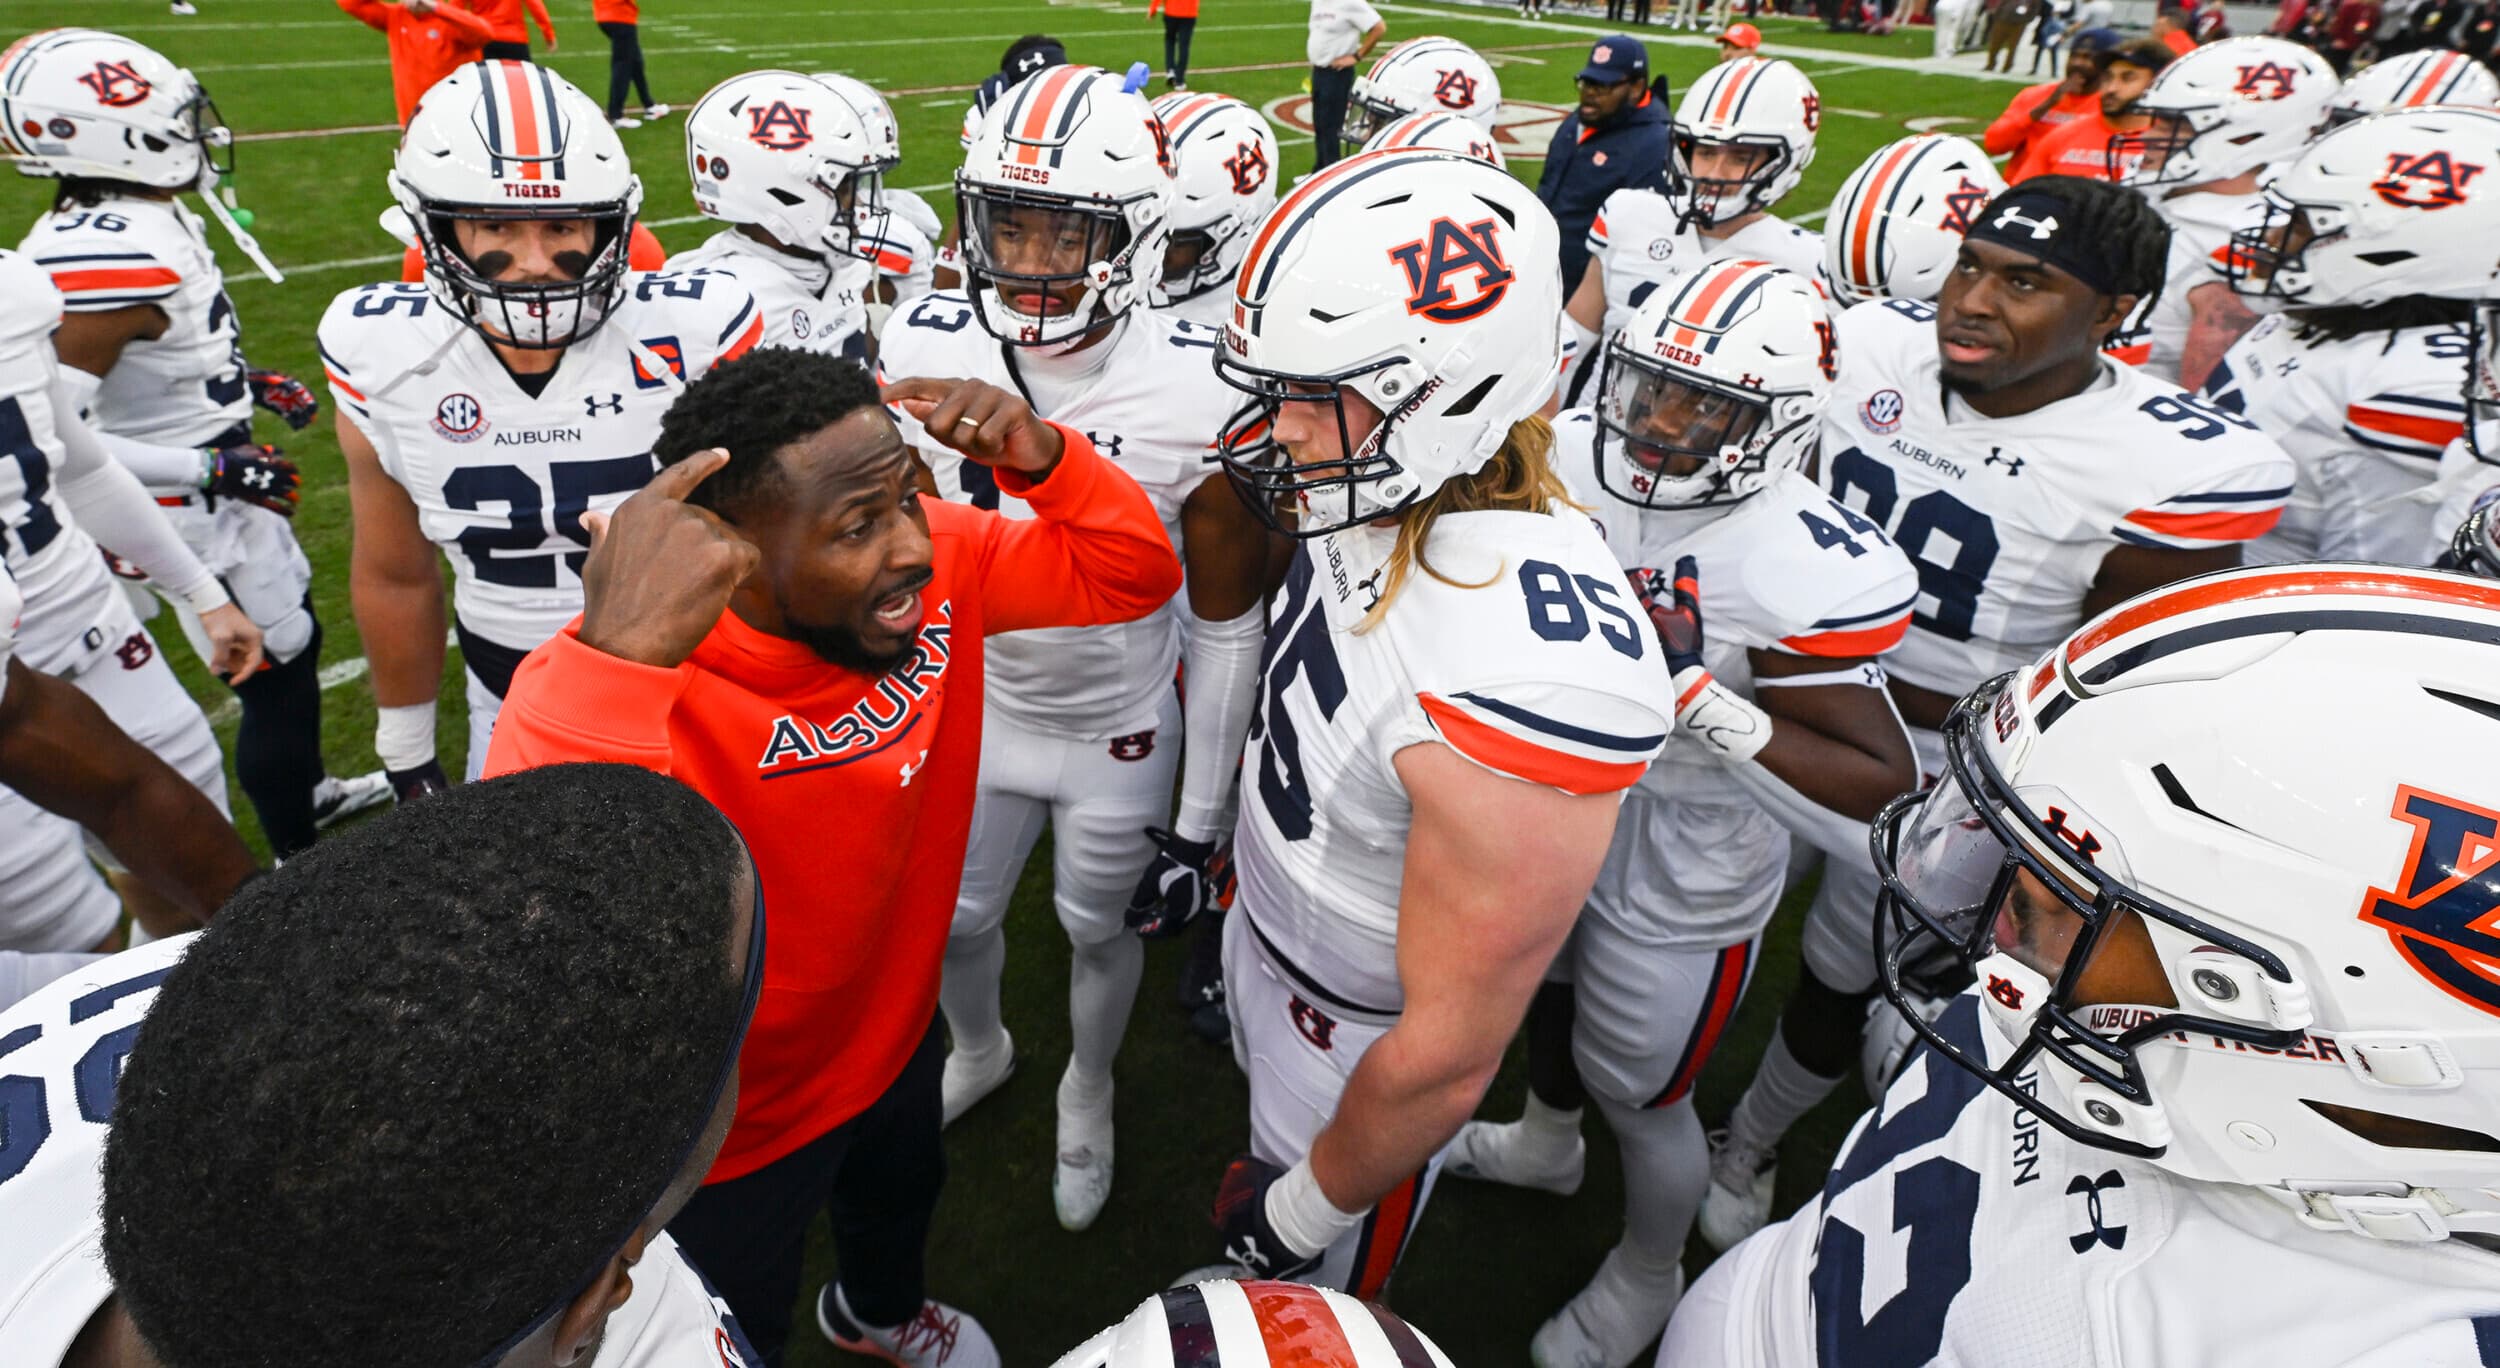 We gave our all for him': Auburn fights in Cadillac's possible final game  as head coach